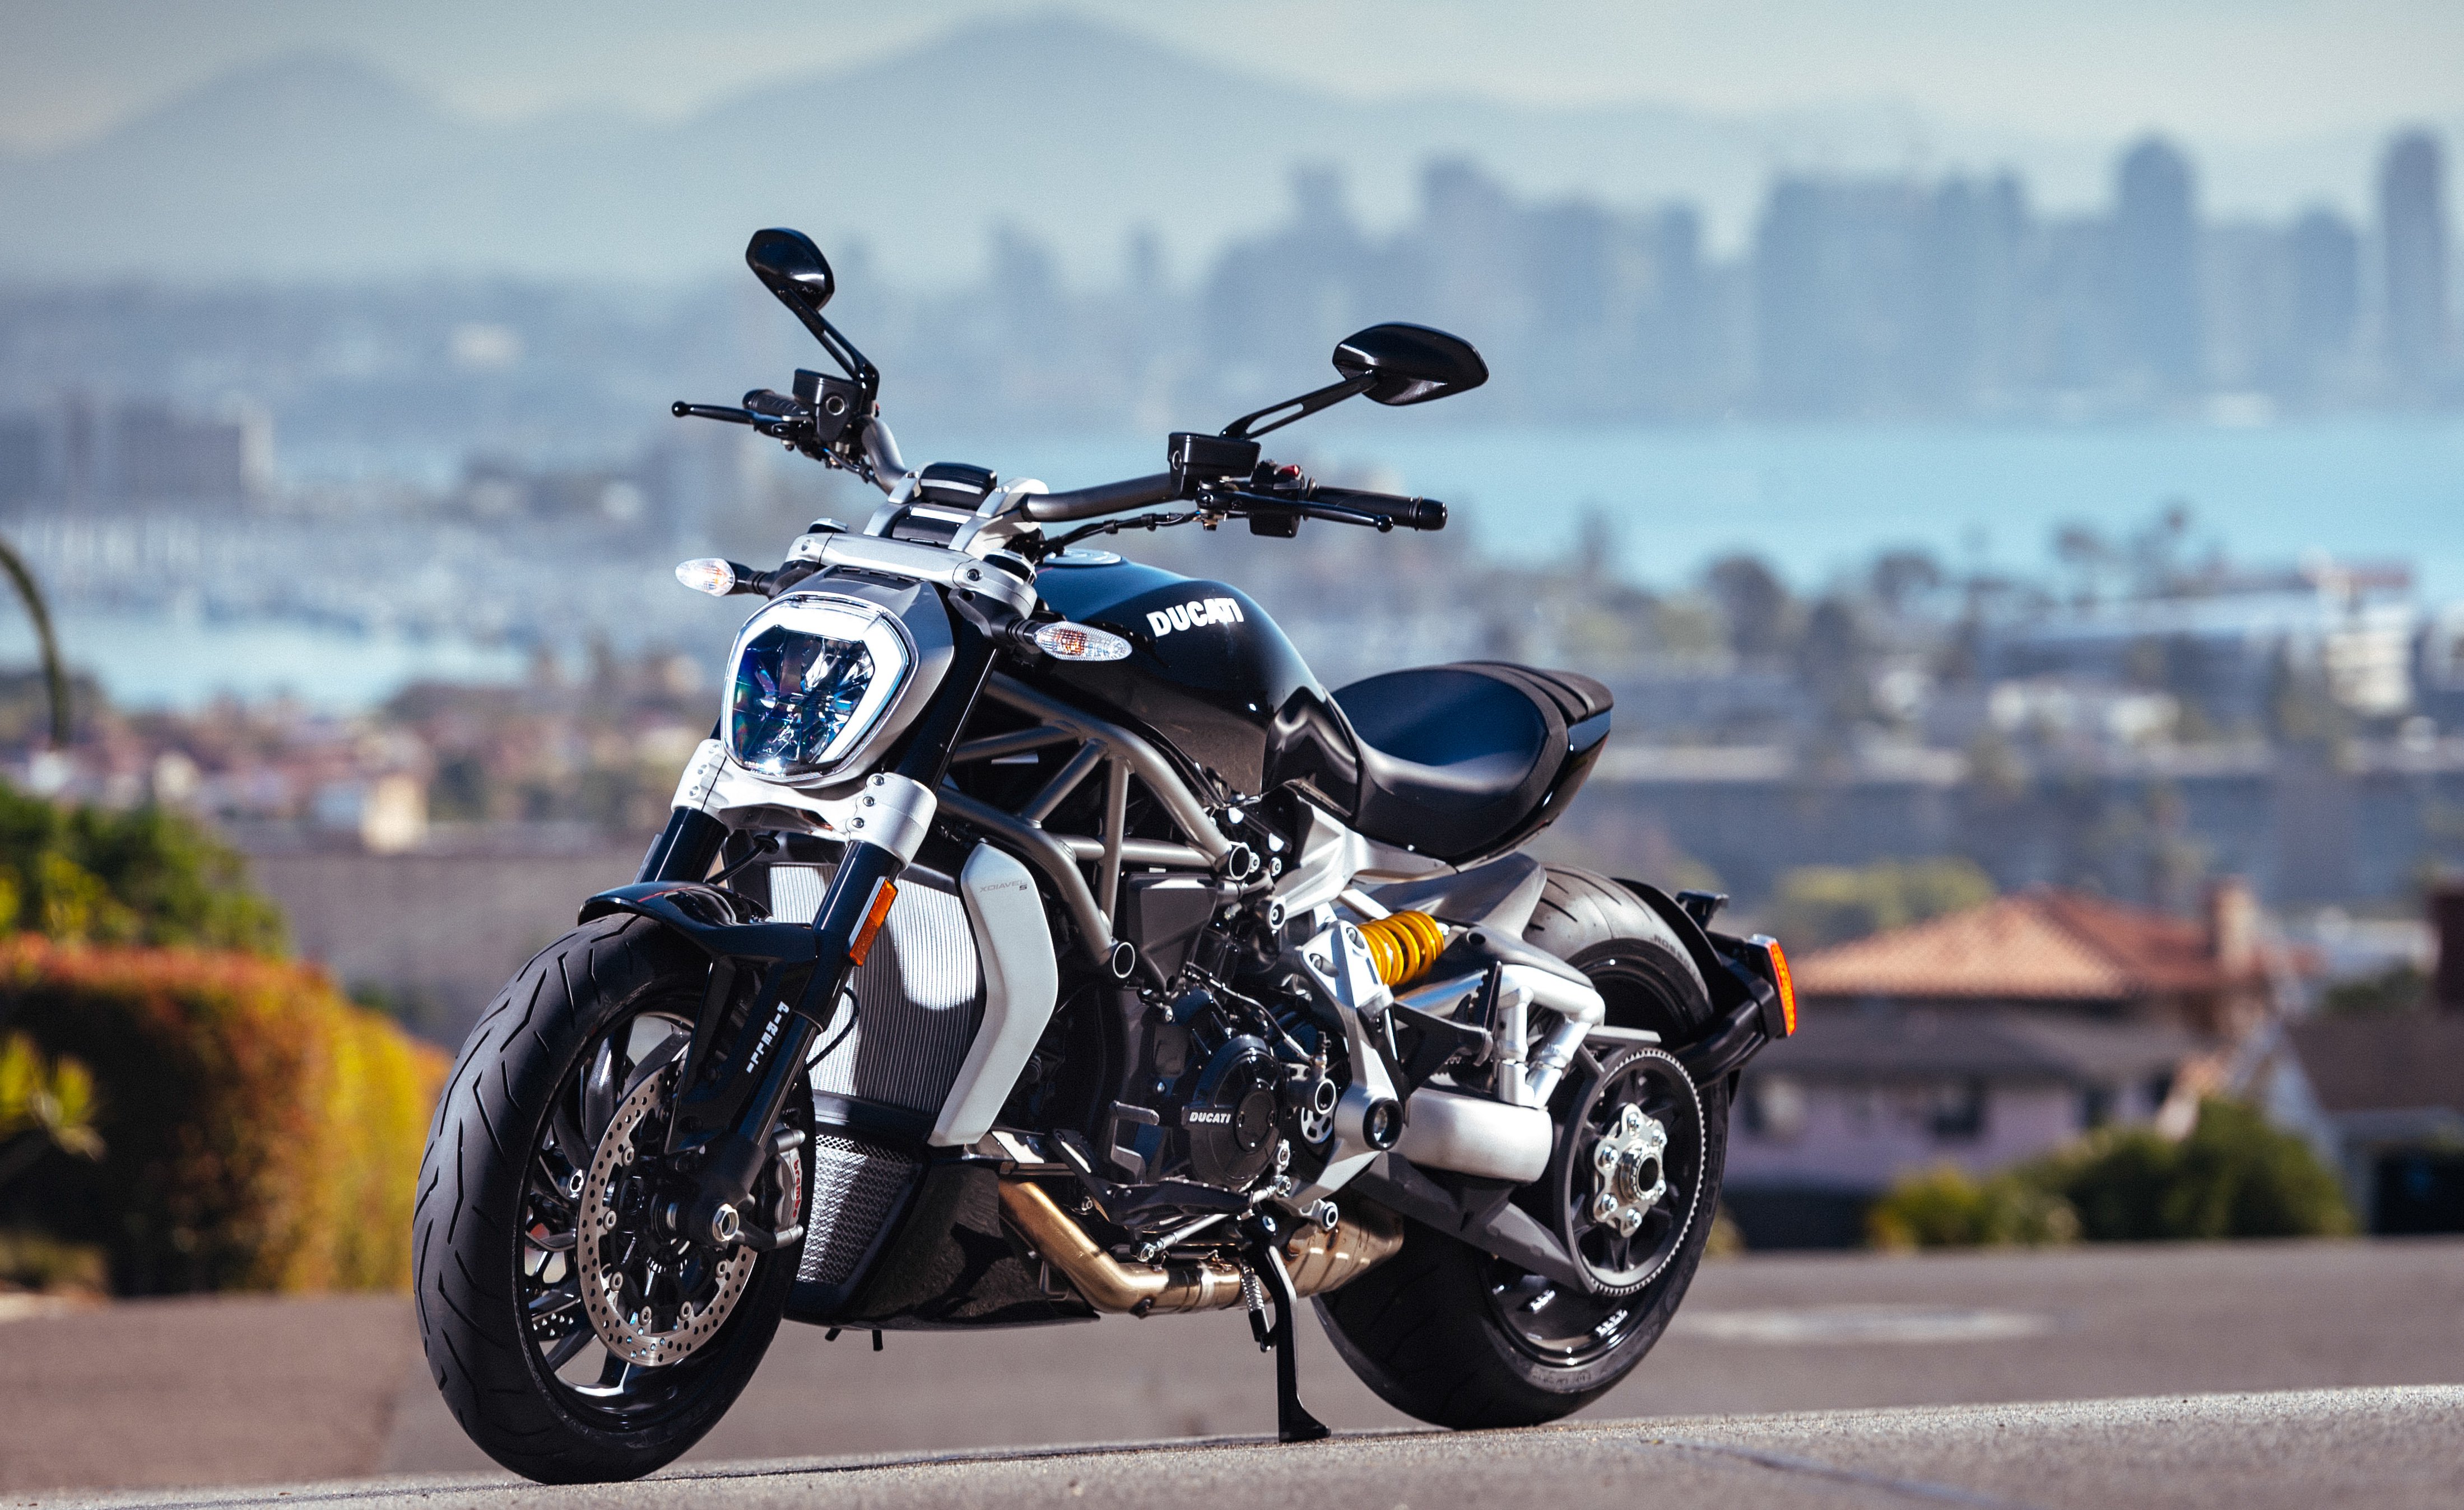 Ducati XDiavel - best import motorcycles